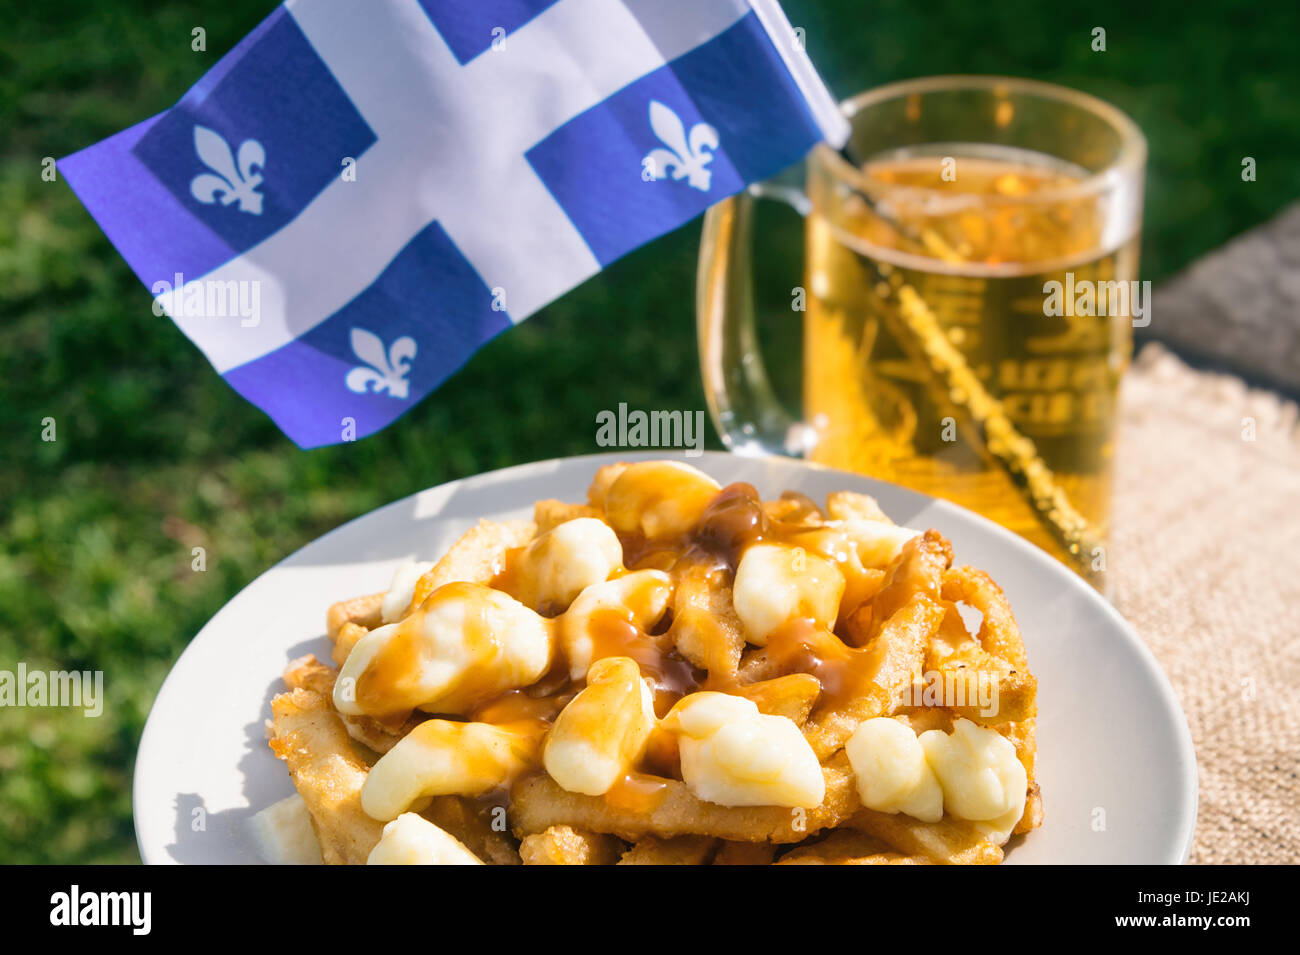 Classic Quebec poutine with french fries, gravy, and cheese curds Stock Photo